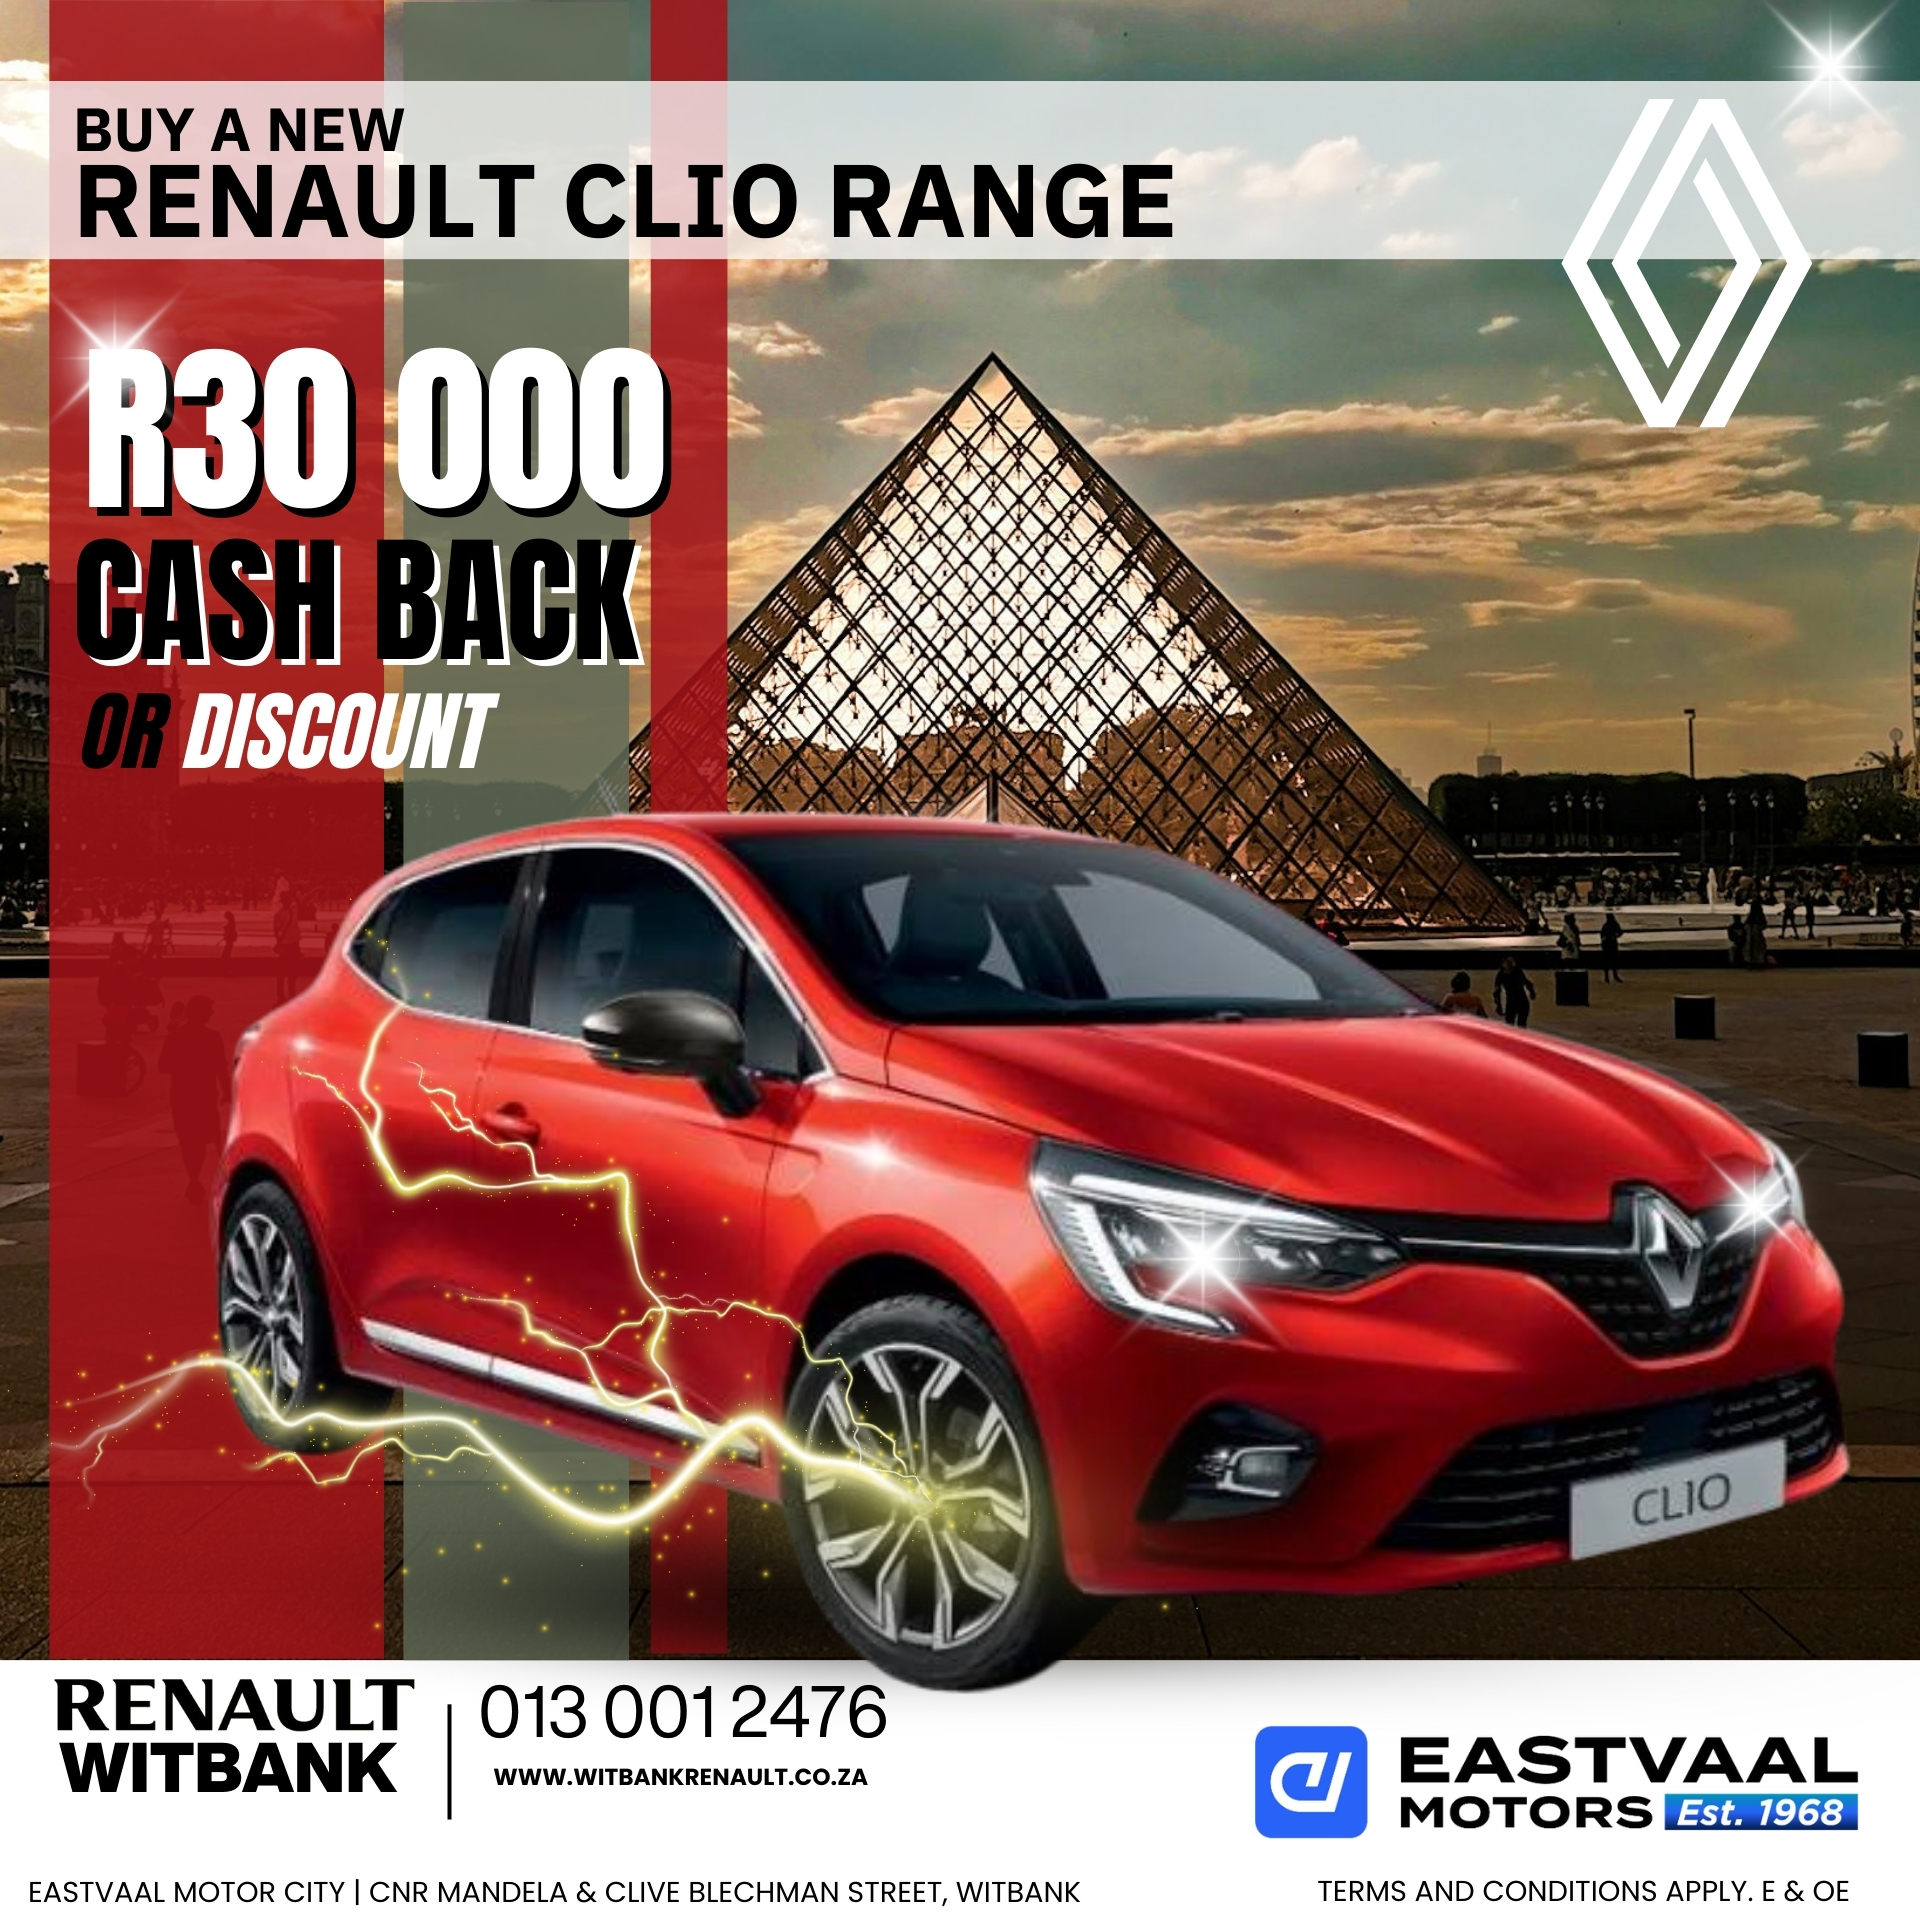 Ready for a new adventure? Drive home a Renault this July with exclusive offers and cashback image from 